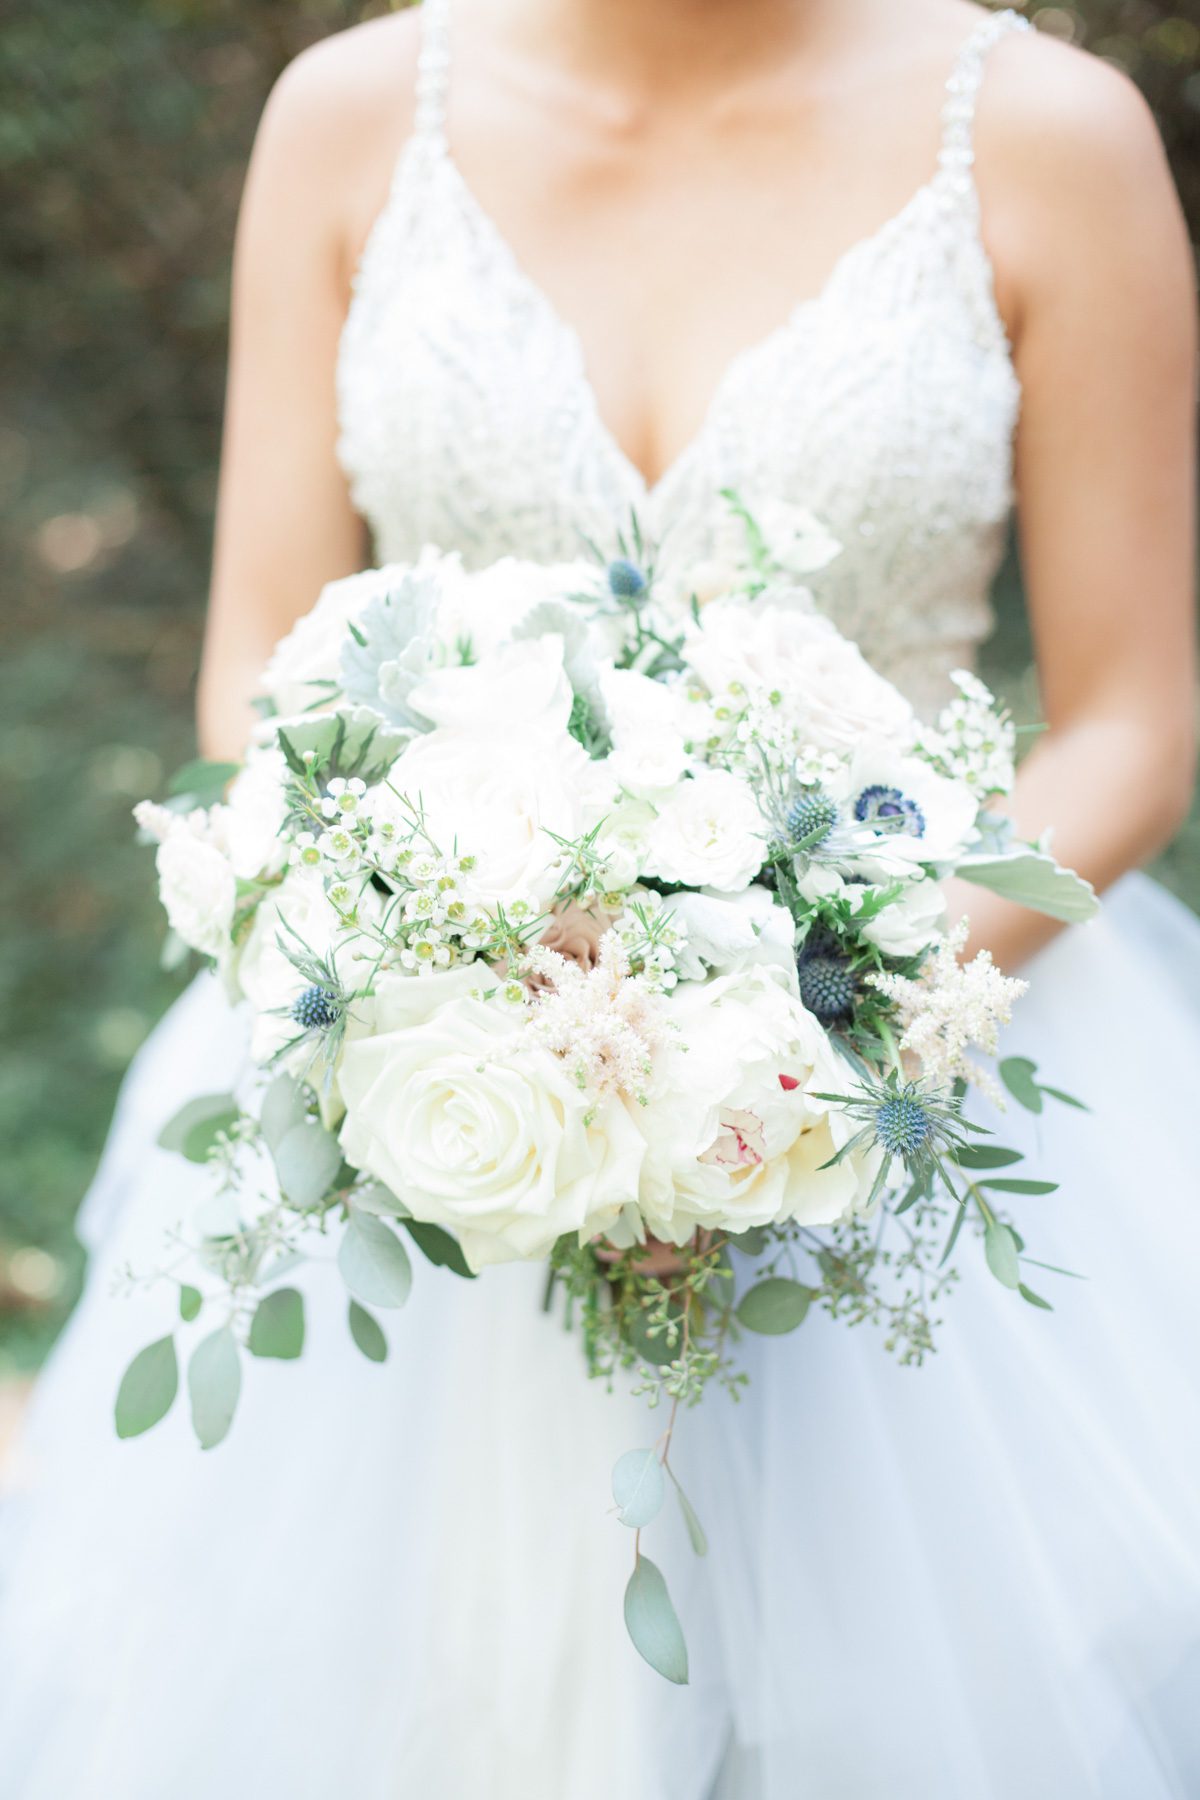 Amazing bride bouquet. Wedding photography at Cedarwood Weddings and Estate in Nashville, TN photography by Krista Lee Photography